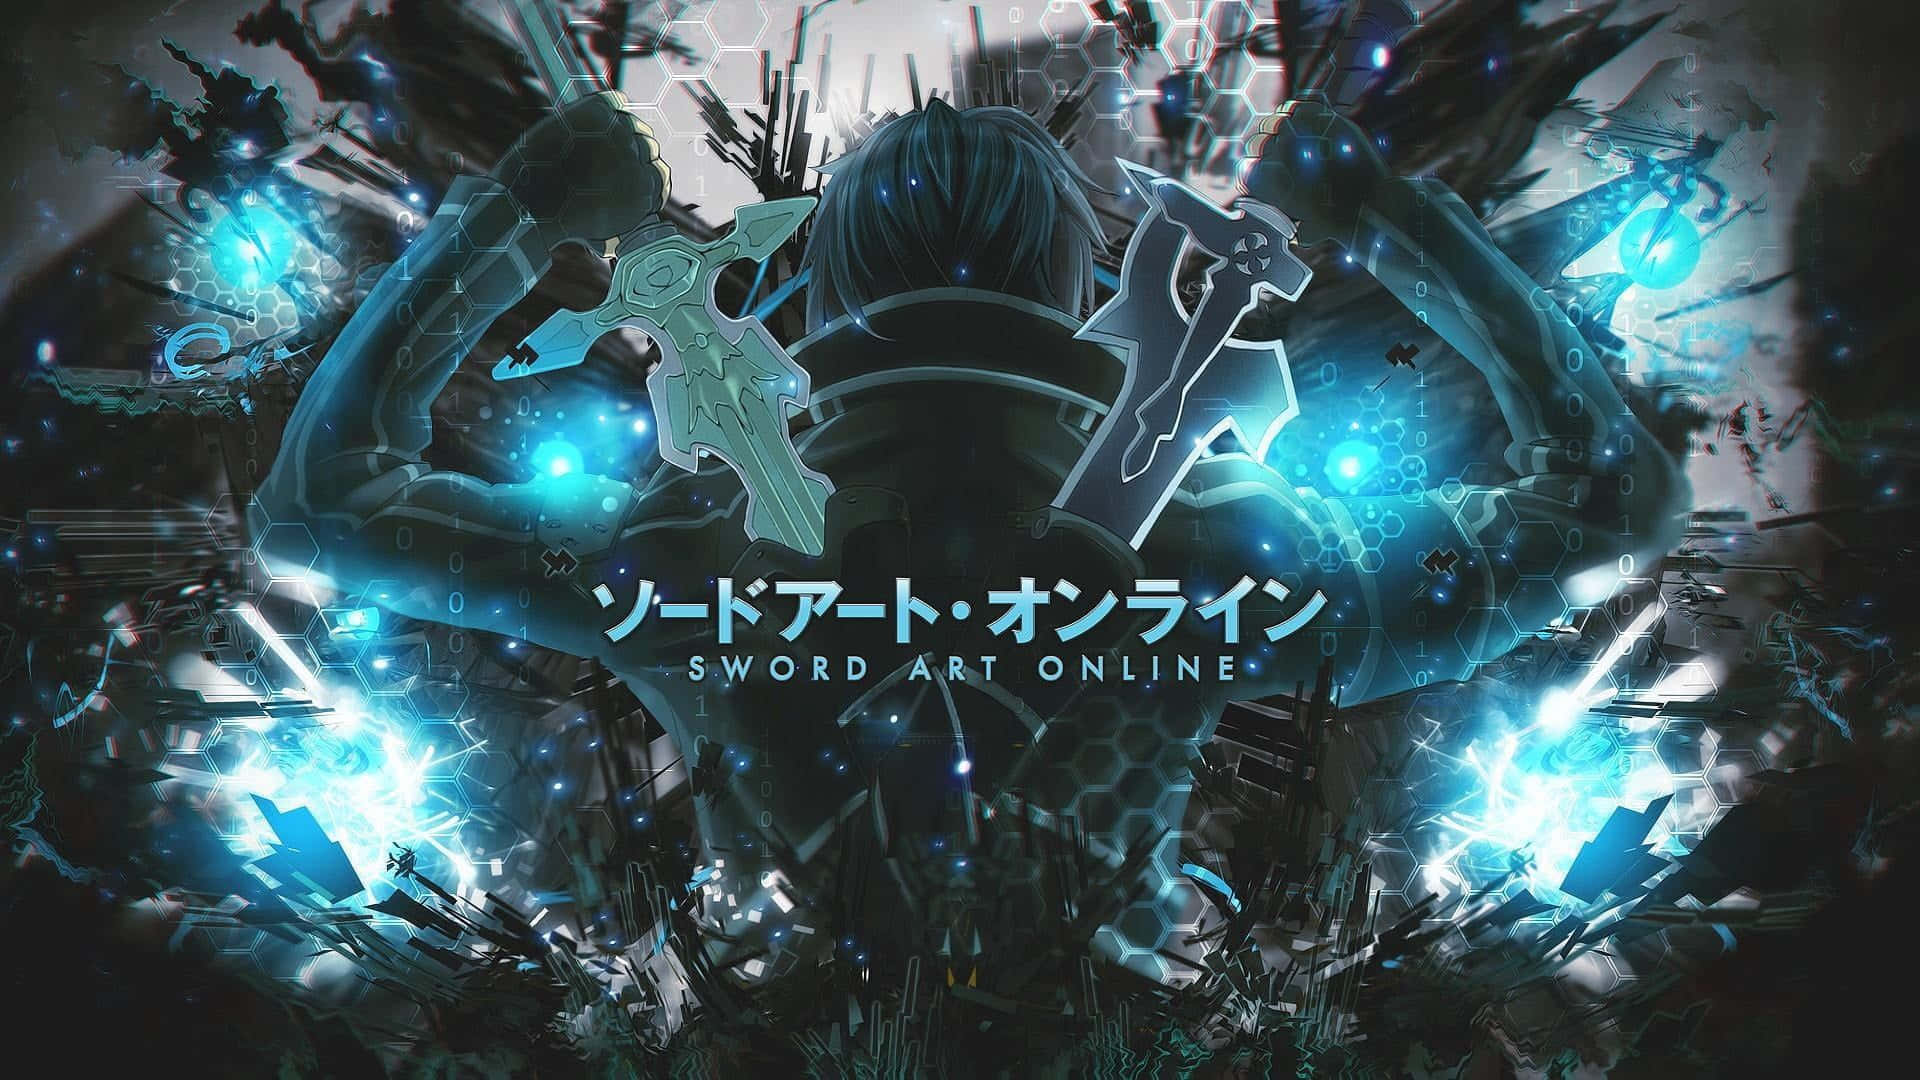 "Welcome to the world of Sword Art Online"